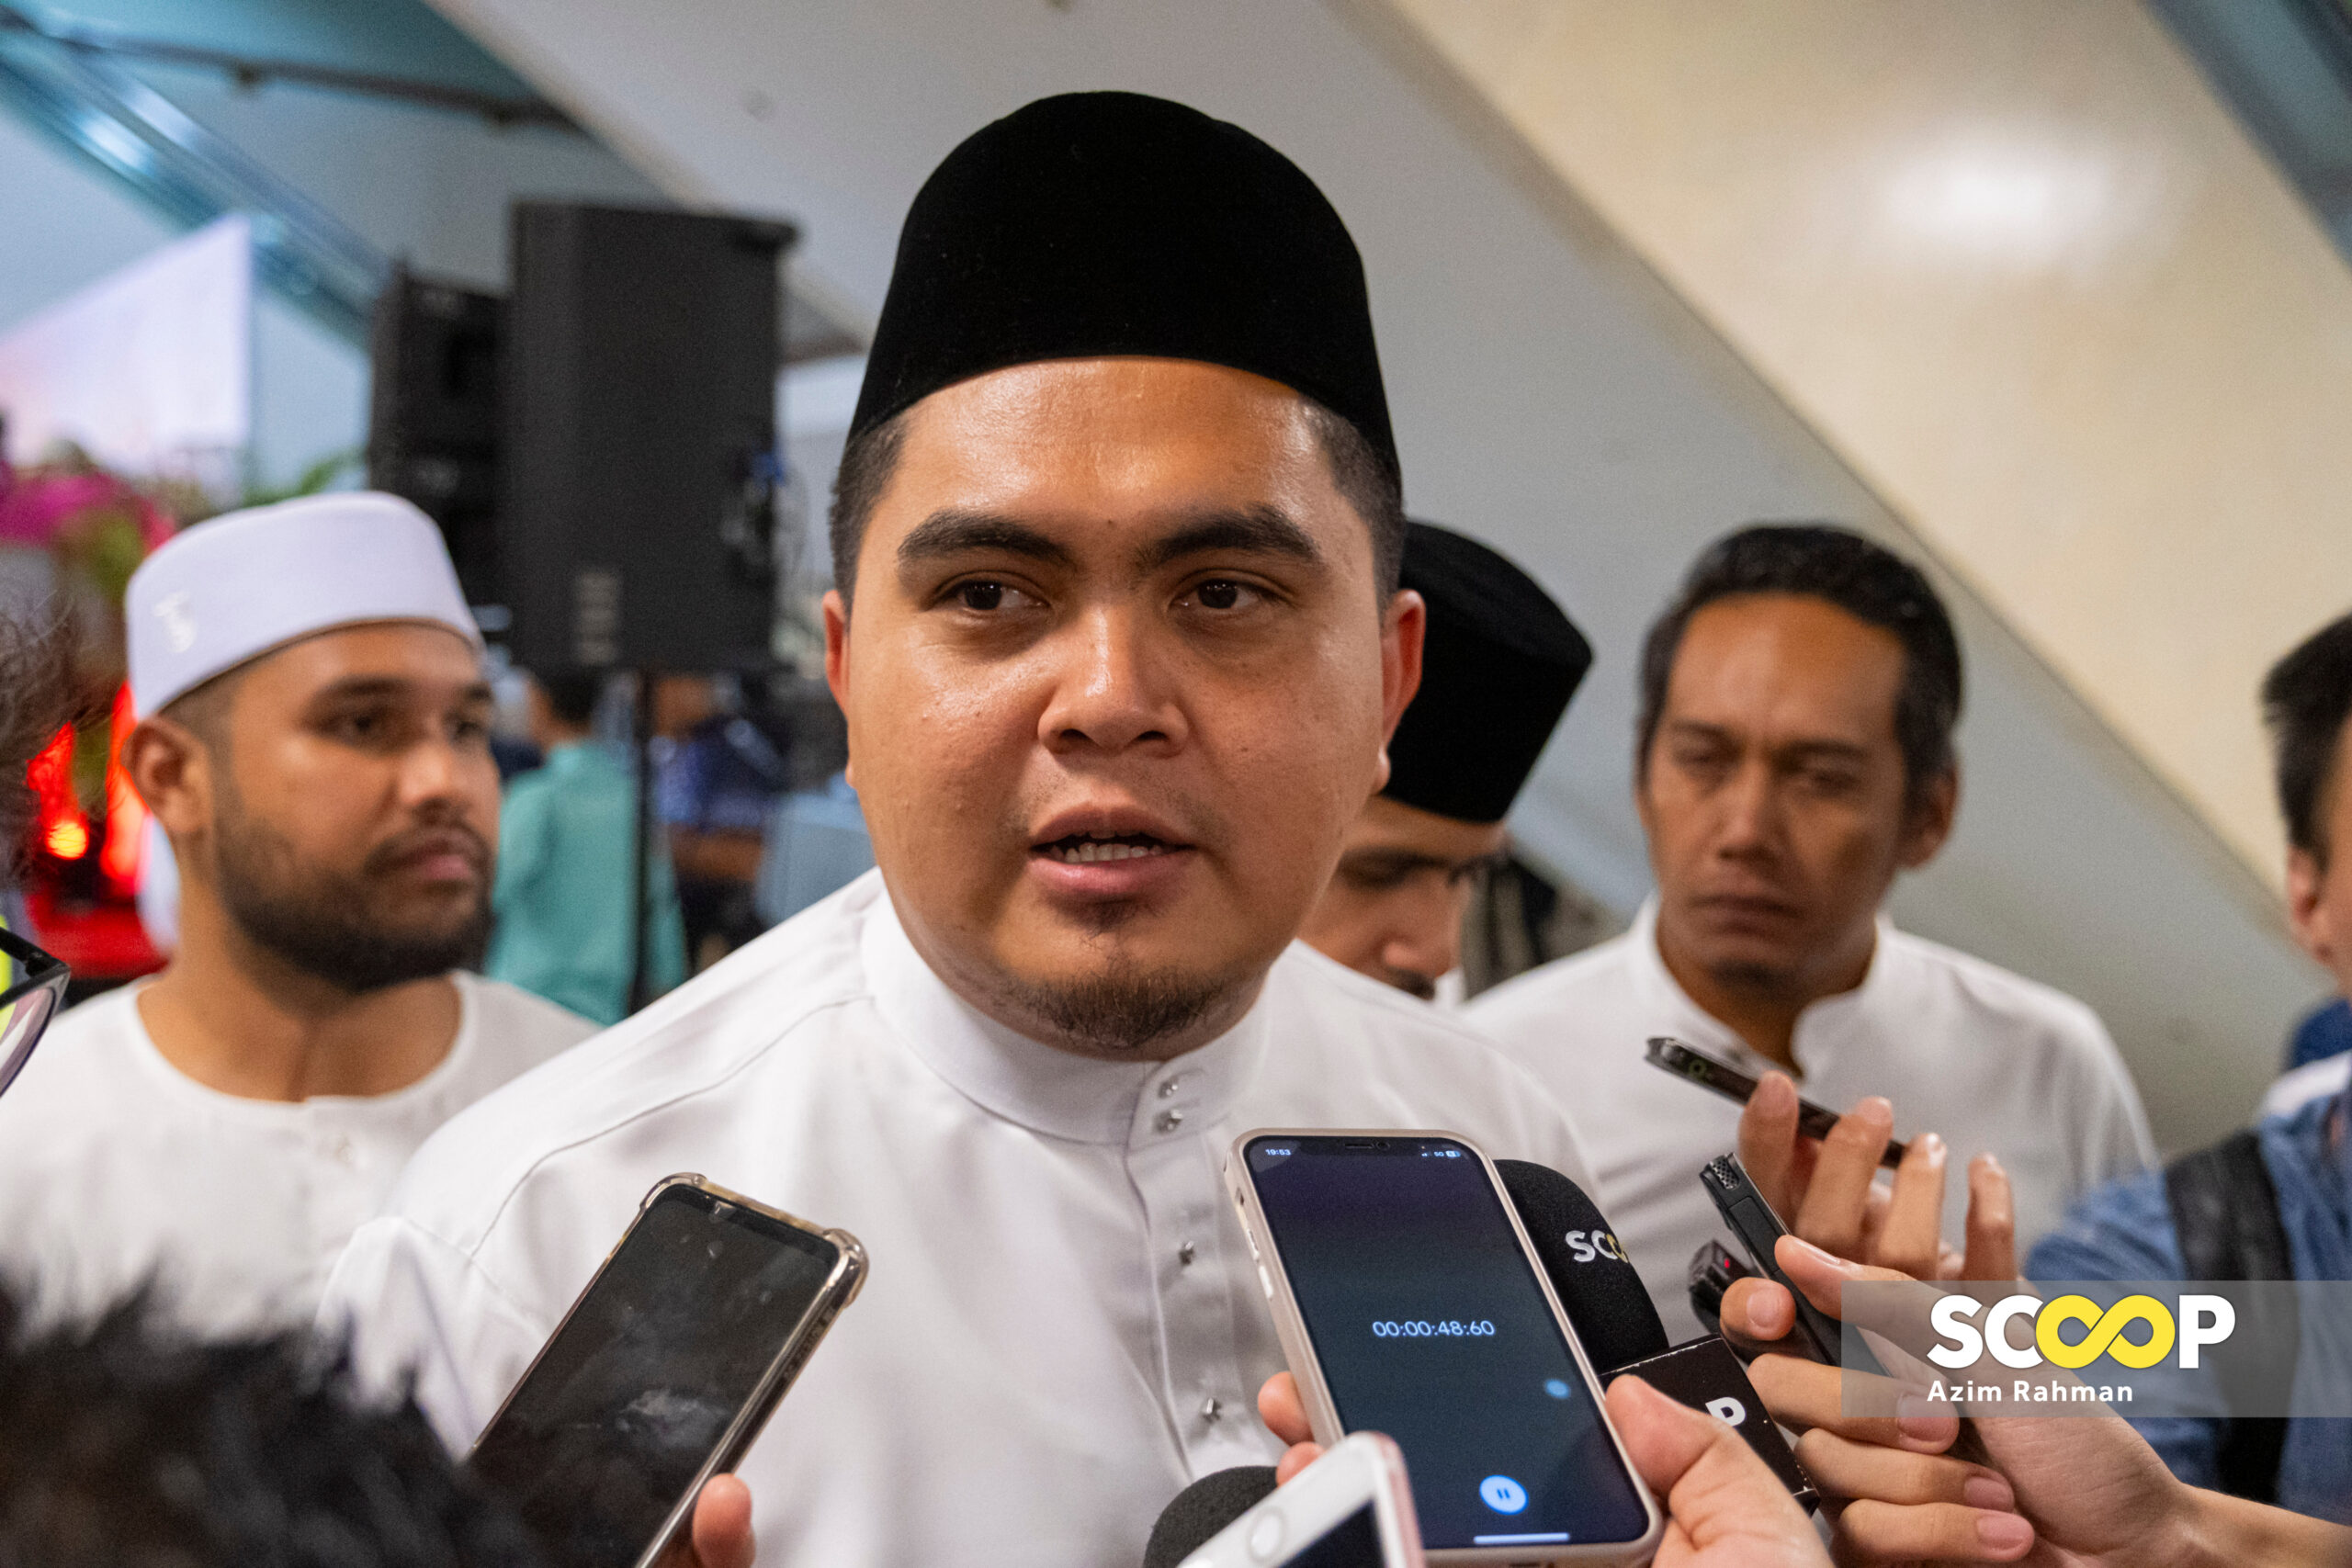 Argue with ideas, not insults: Umno’s Akmal slams PN for 'immature politics’